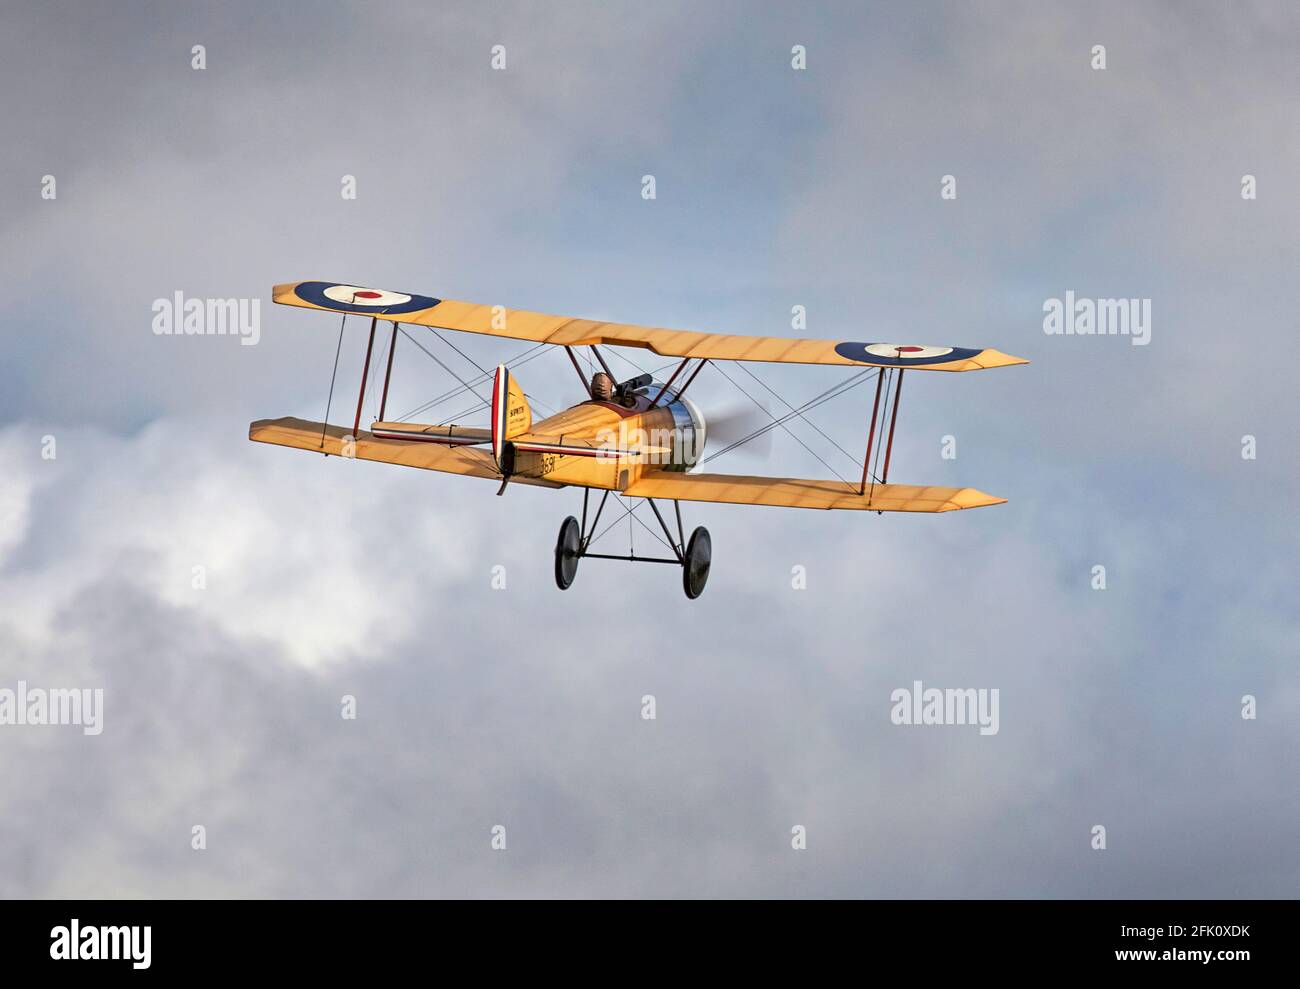 Sopwith Camel replica British fighter biplane from the First World War Stock Photo